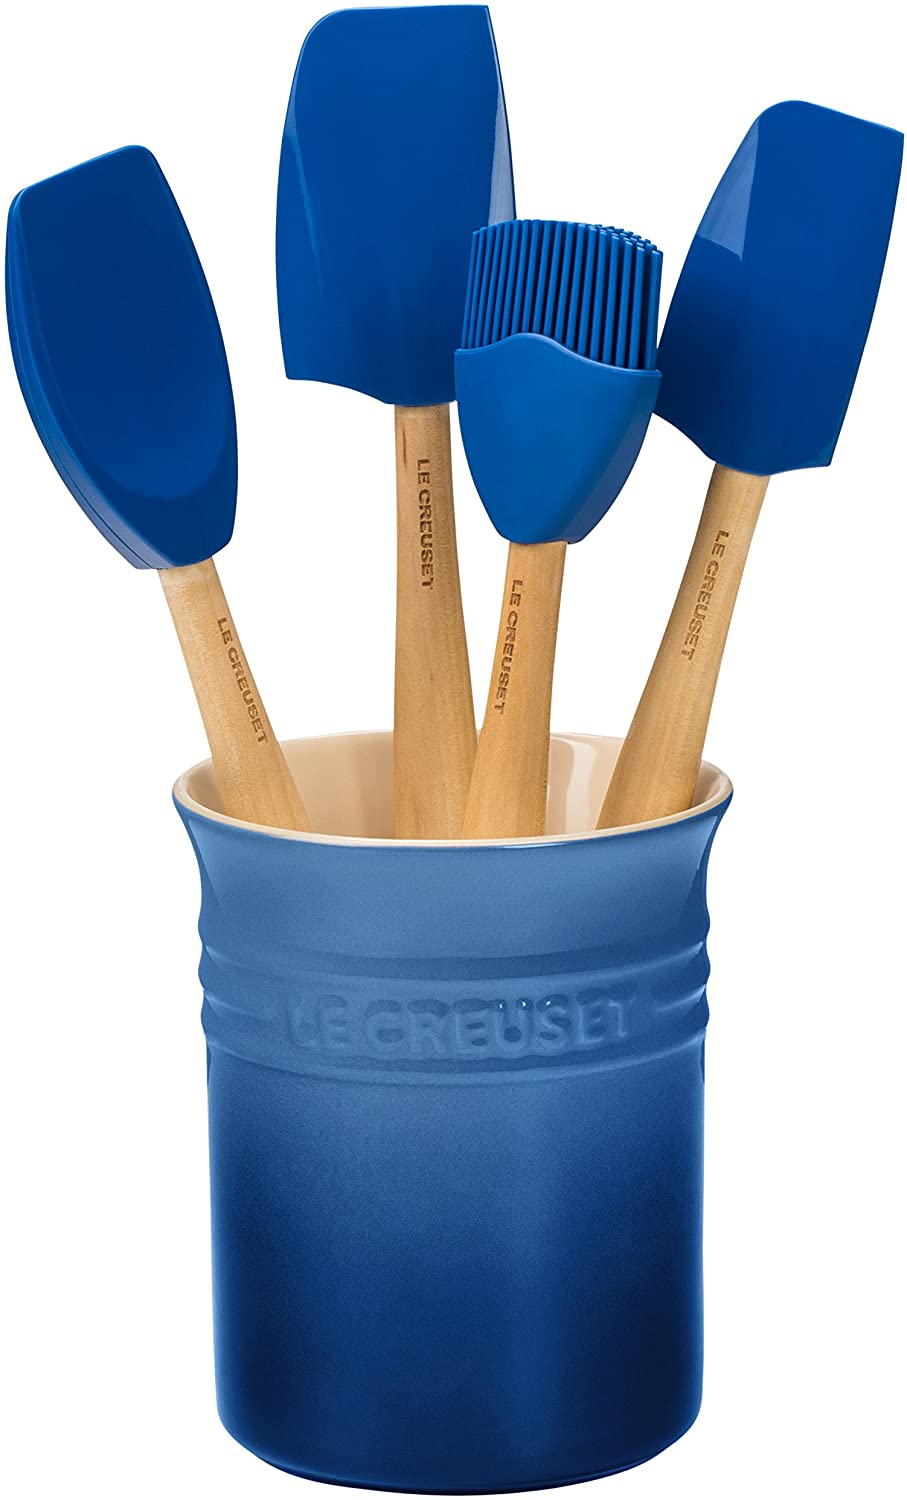 Le Creuset Silicone Craft Series Utensil Set with Stoneware Crock, 5 pc.